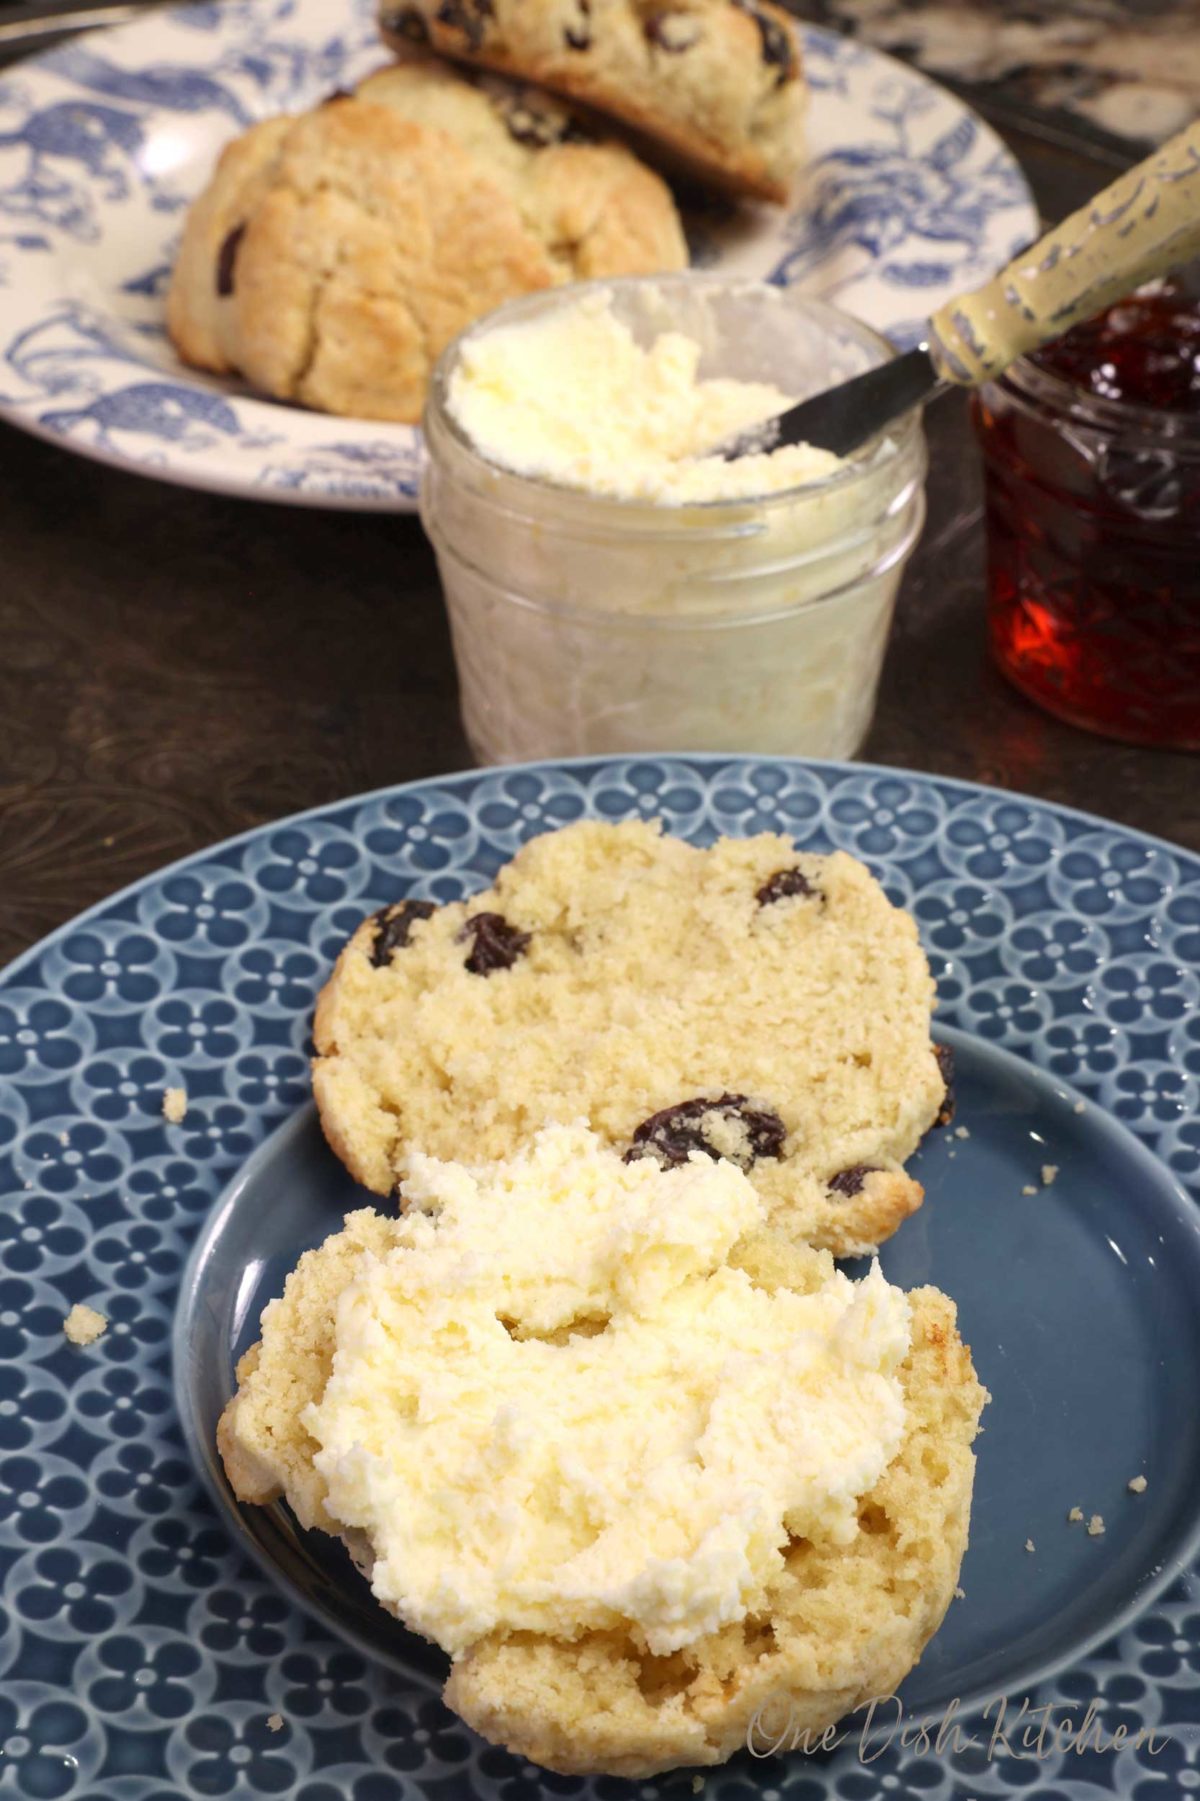 a scone sliced in half on a blue plate with clotted cream spread over one side of the scone